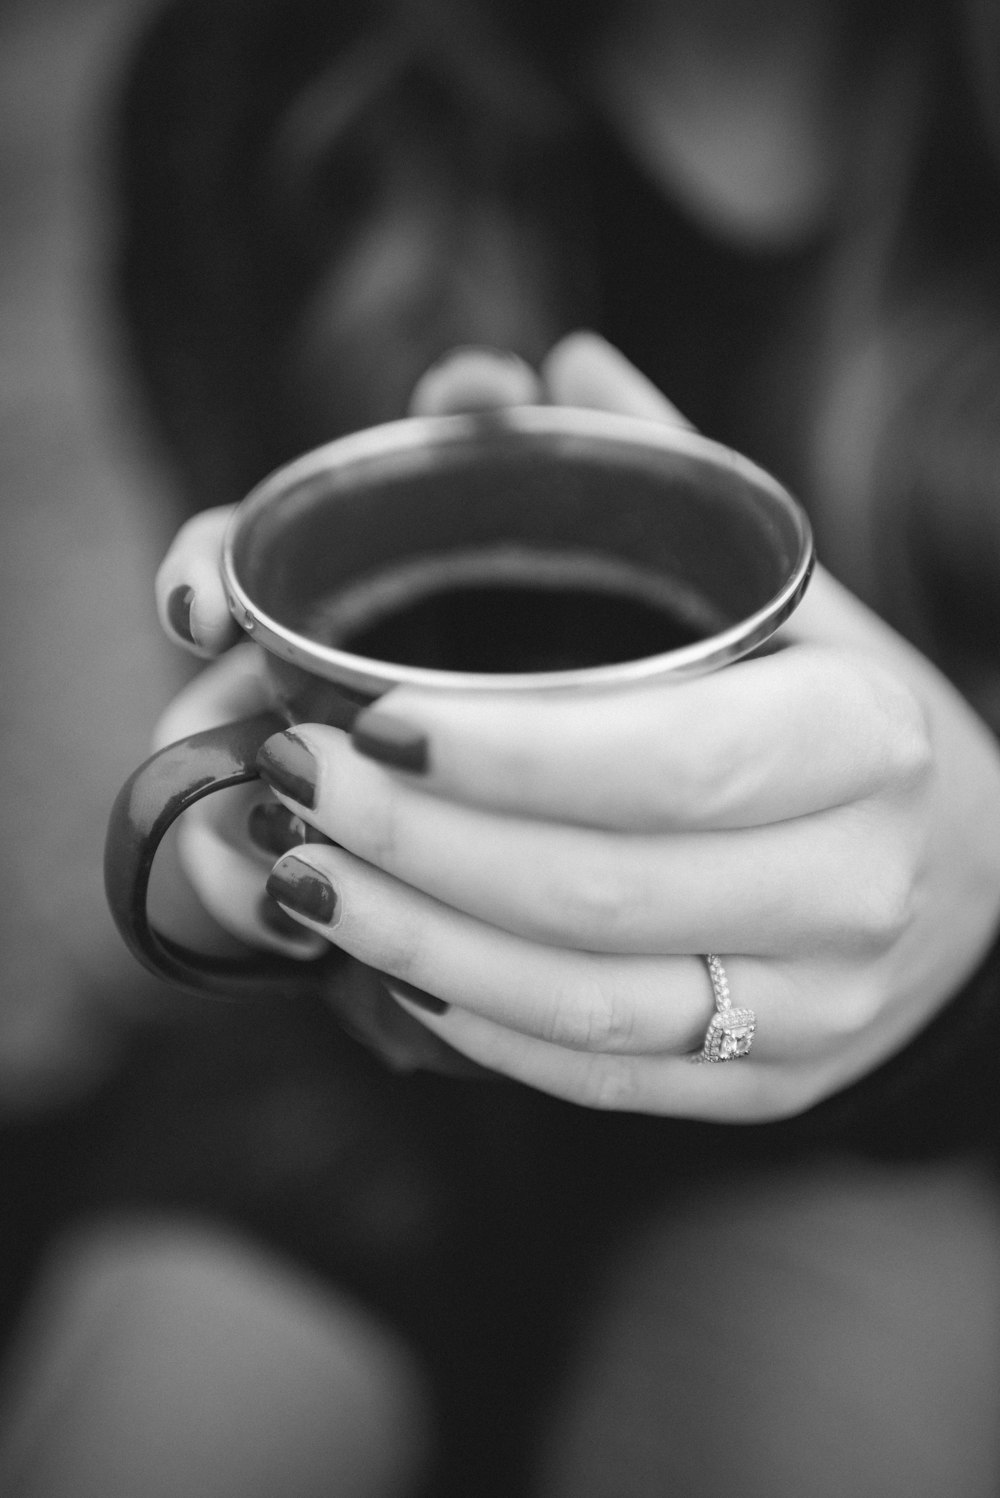 grayscale photography of person holding mug